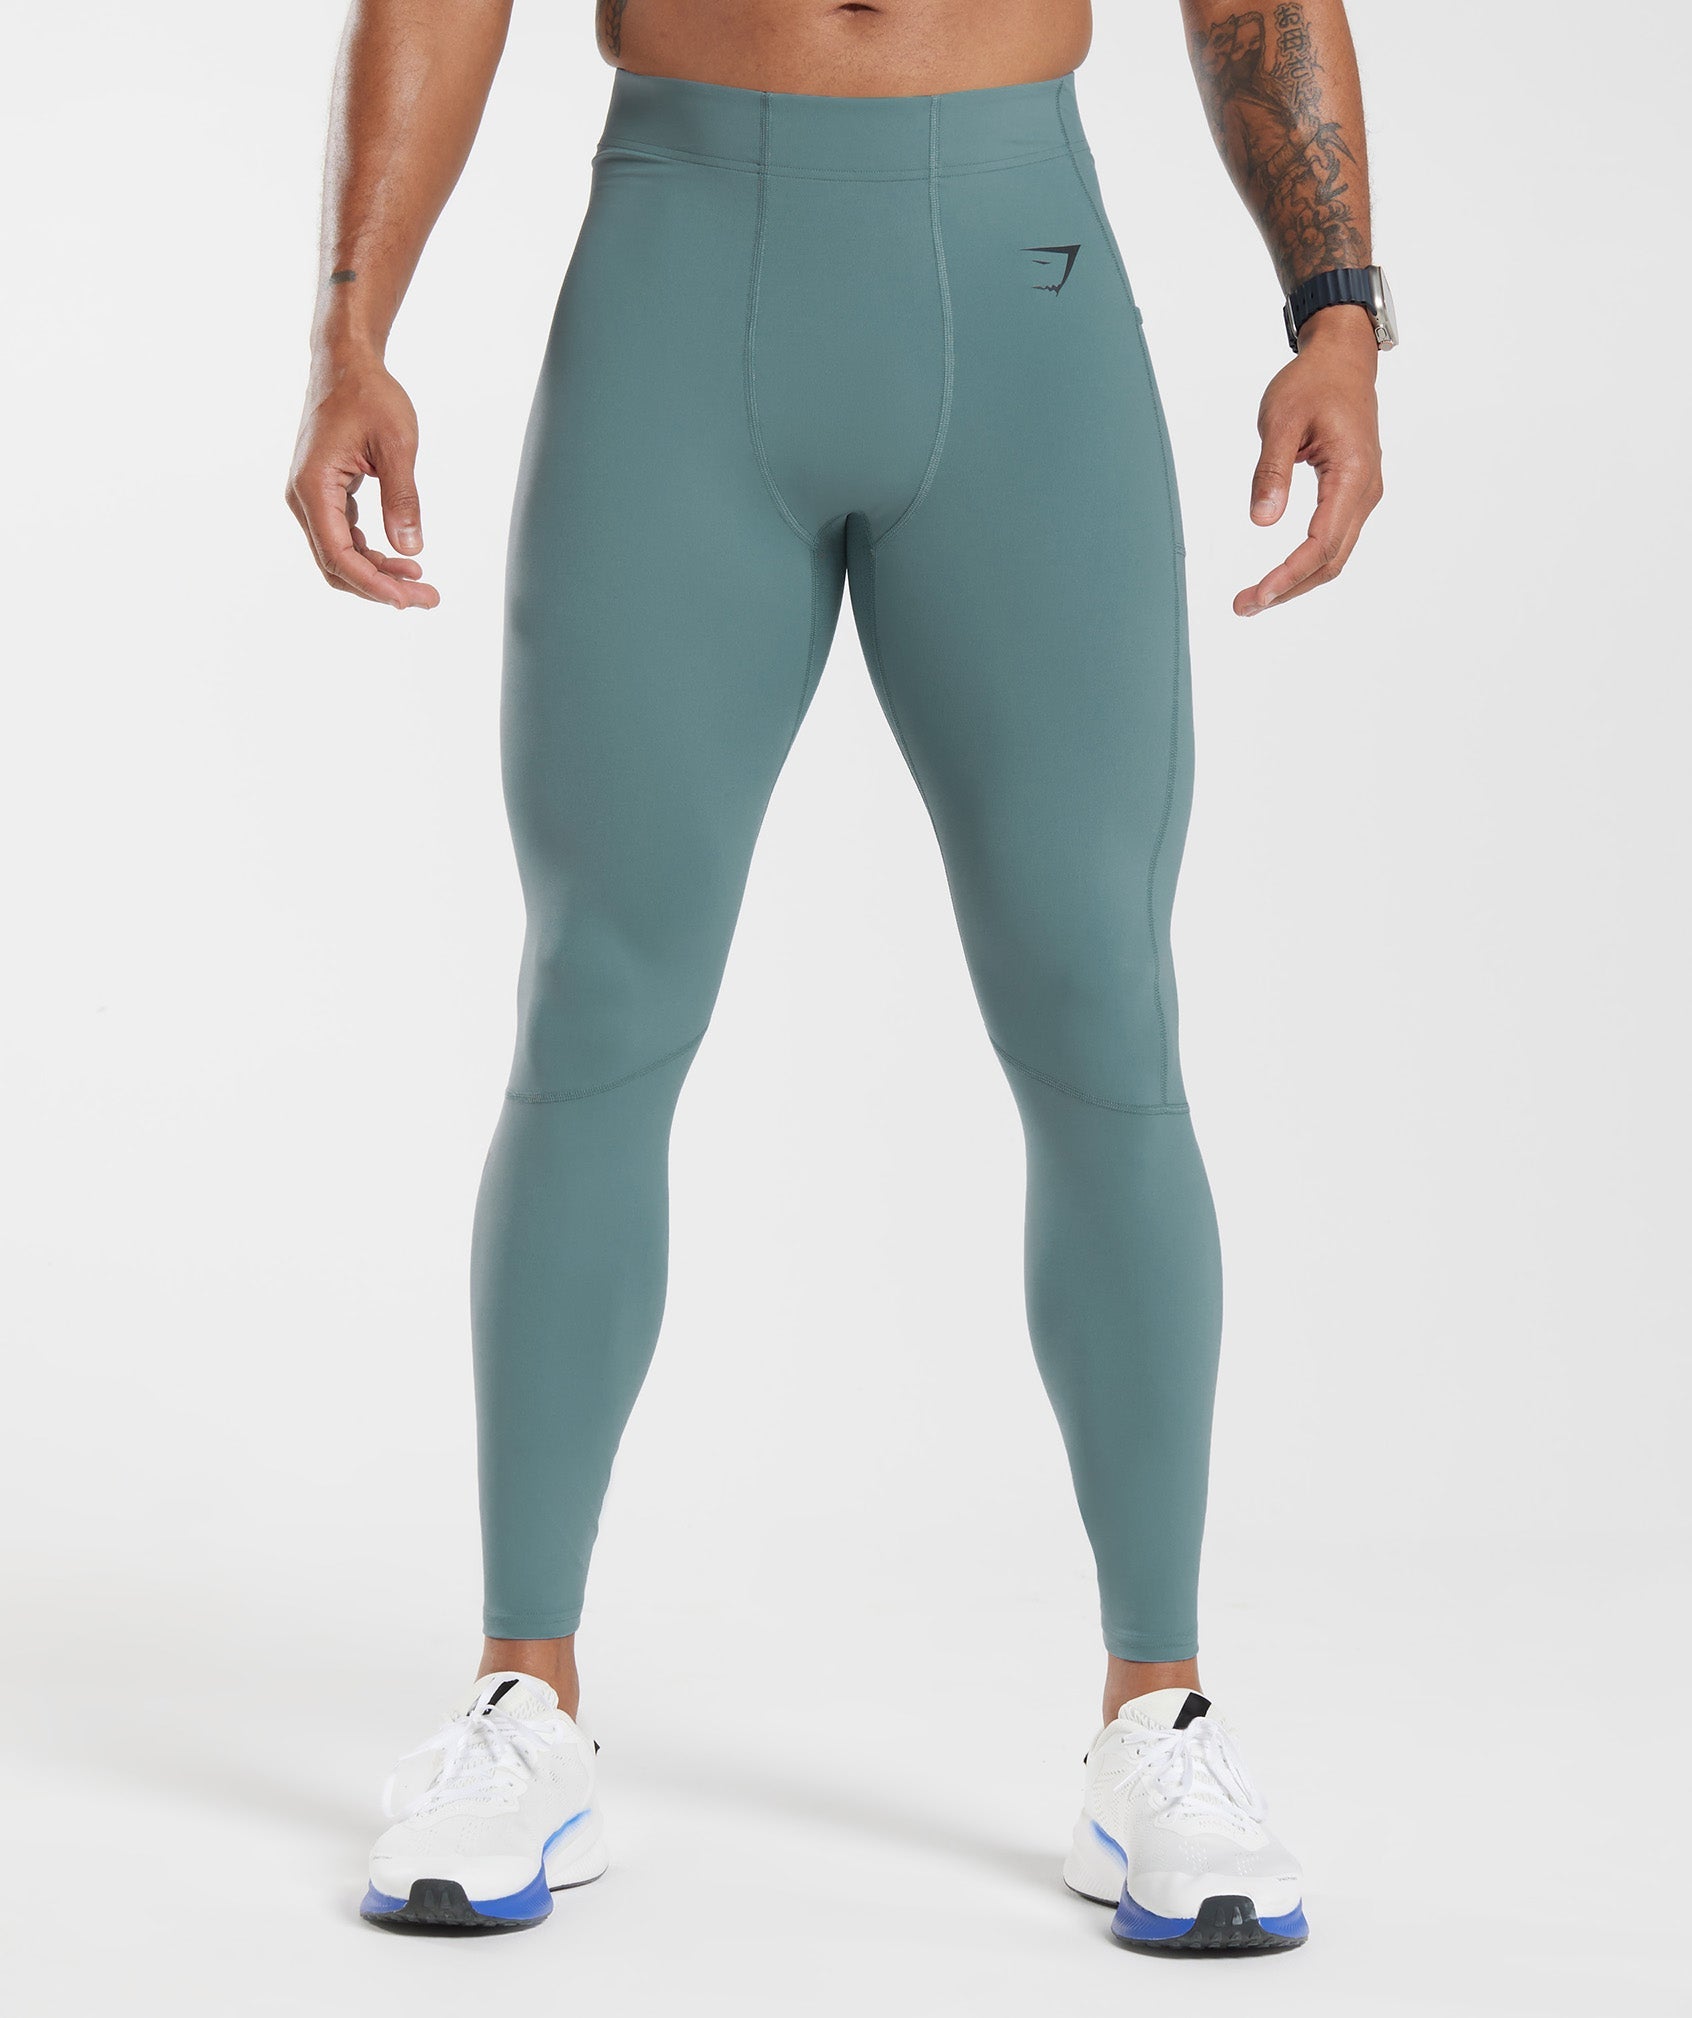  Men's Compression Pants Running Tights Compression Skin Tights  Base Layer Gym Sports Tights White L : Clothing, Shoes & Jewelry